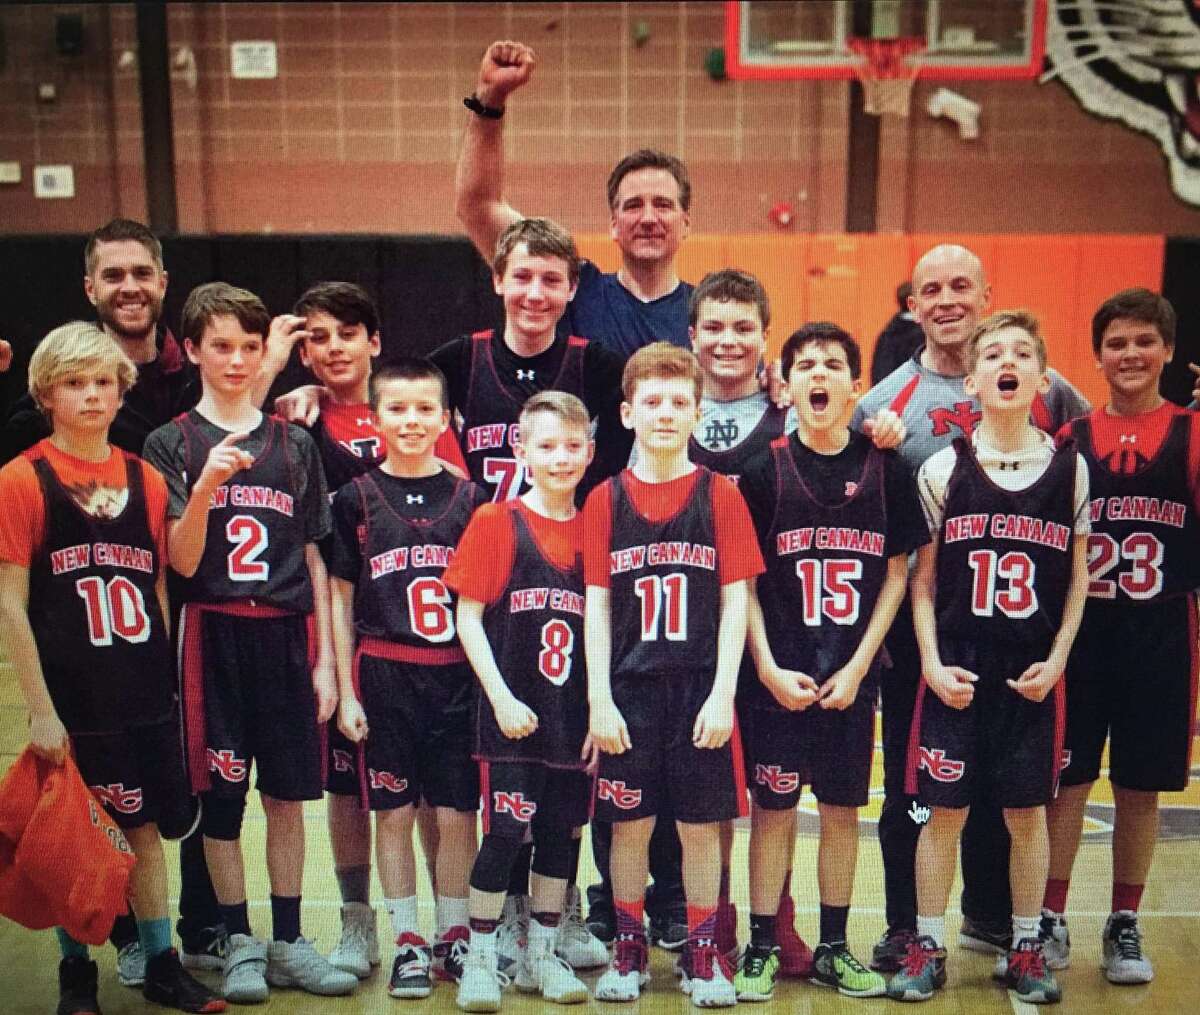 The New Canaan sixth grade Black team poses after winning the FCBL A Division championship.